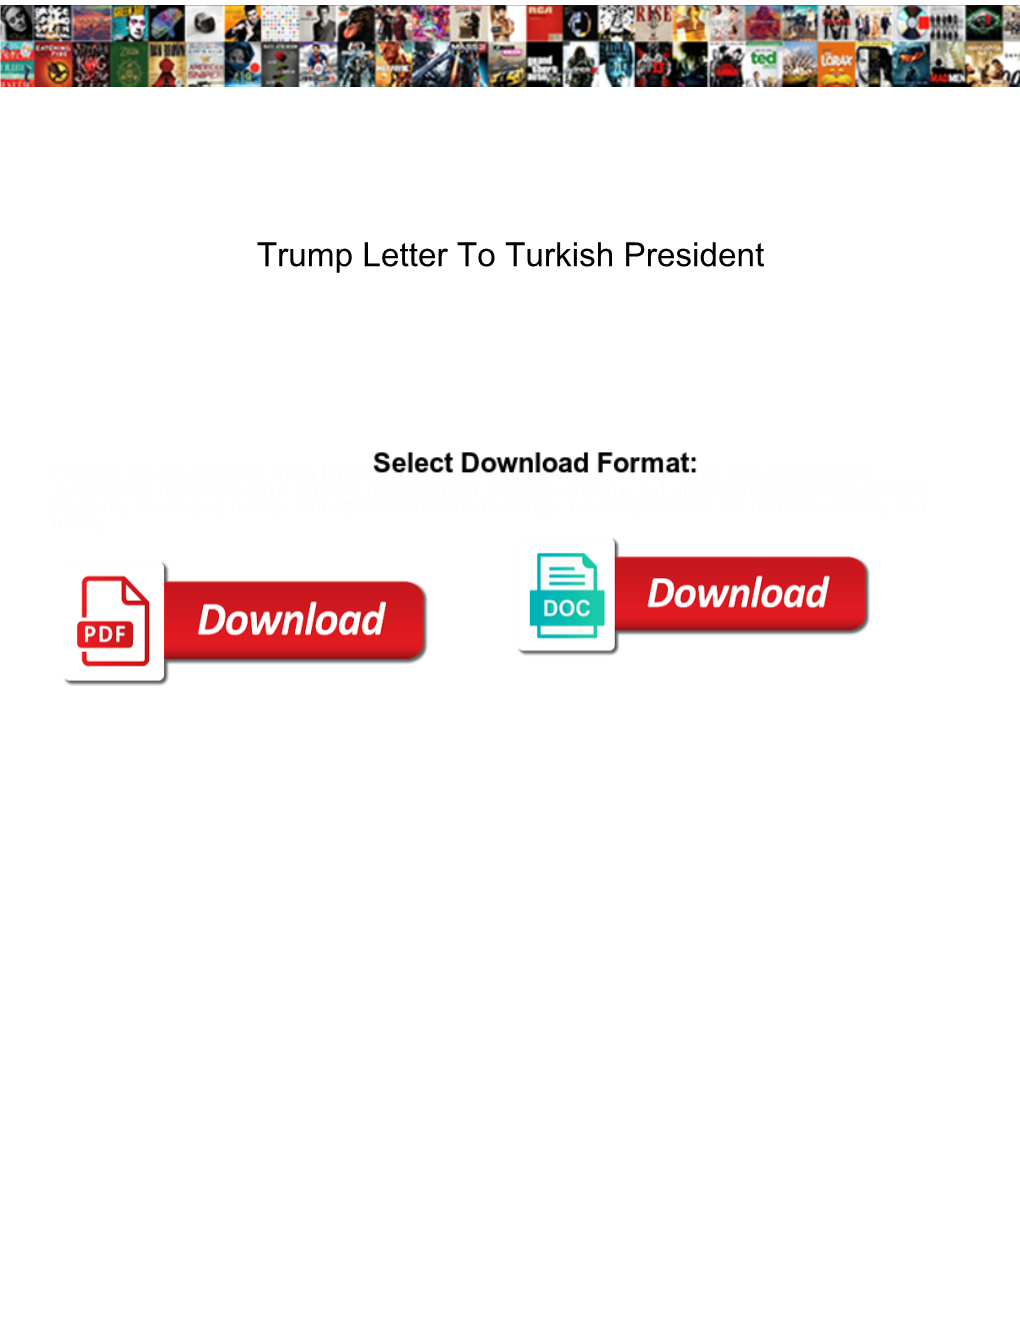 Trump Letter to Turkish President